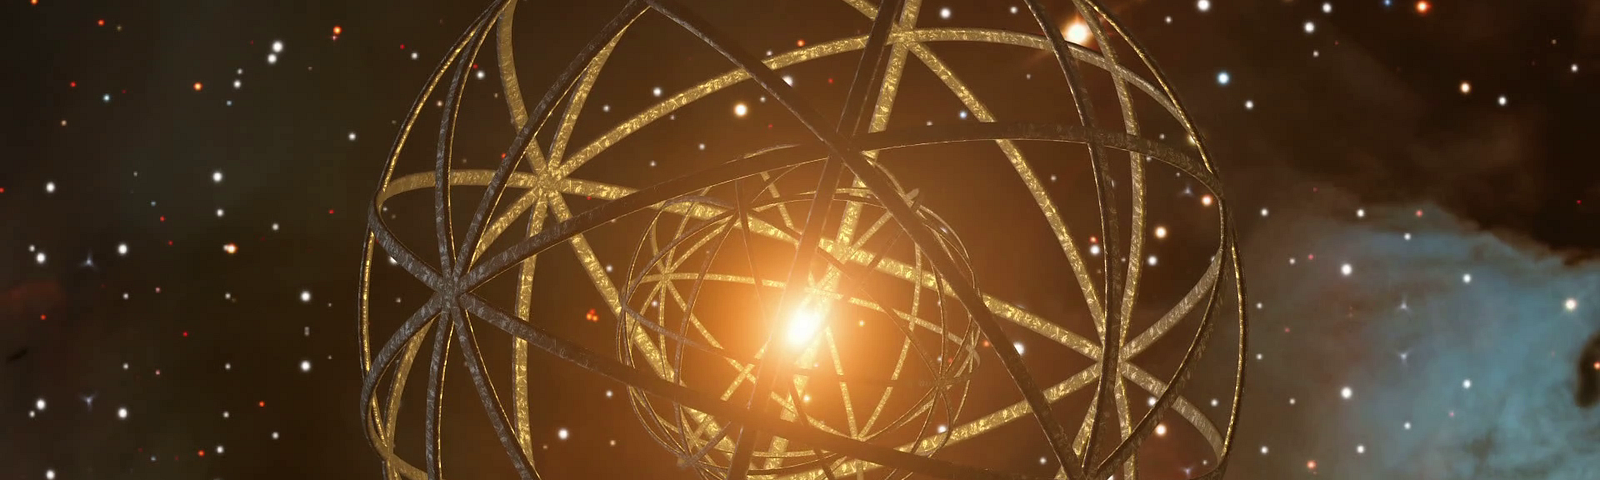 Enormous structure surrounding a star looking like a net